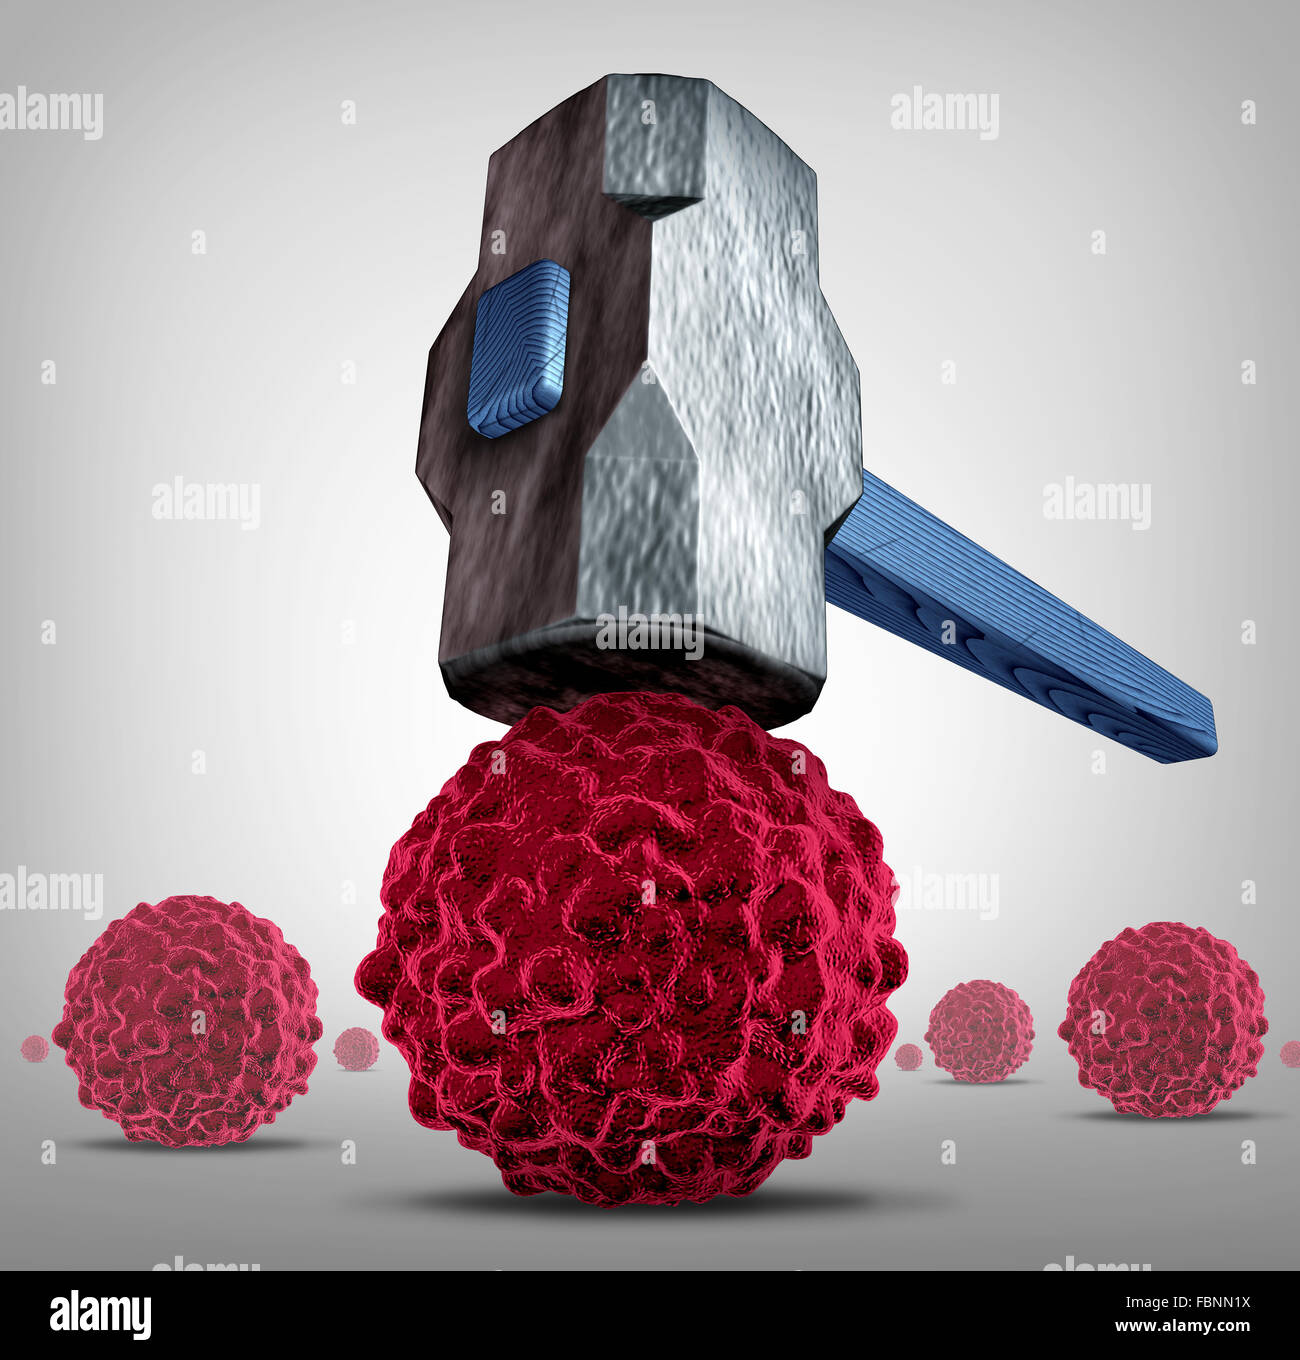 Crush cancer concept as a heavy sledgehammer or hammer crushing and smashing,a cancerous cell as a health care medical symbol for a research or pharmaceutical cure to fight the dangerous disease with life saving treatments. Stock Photo